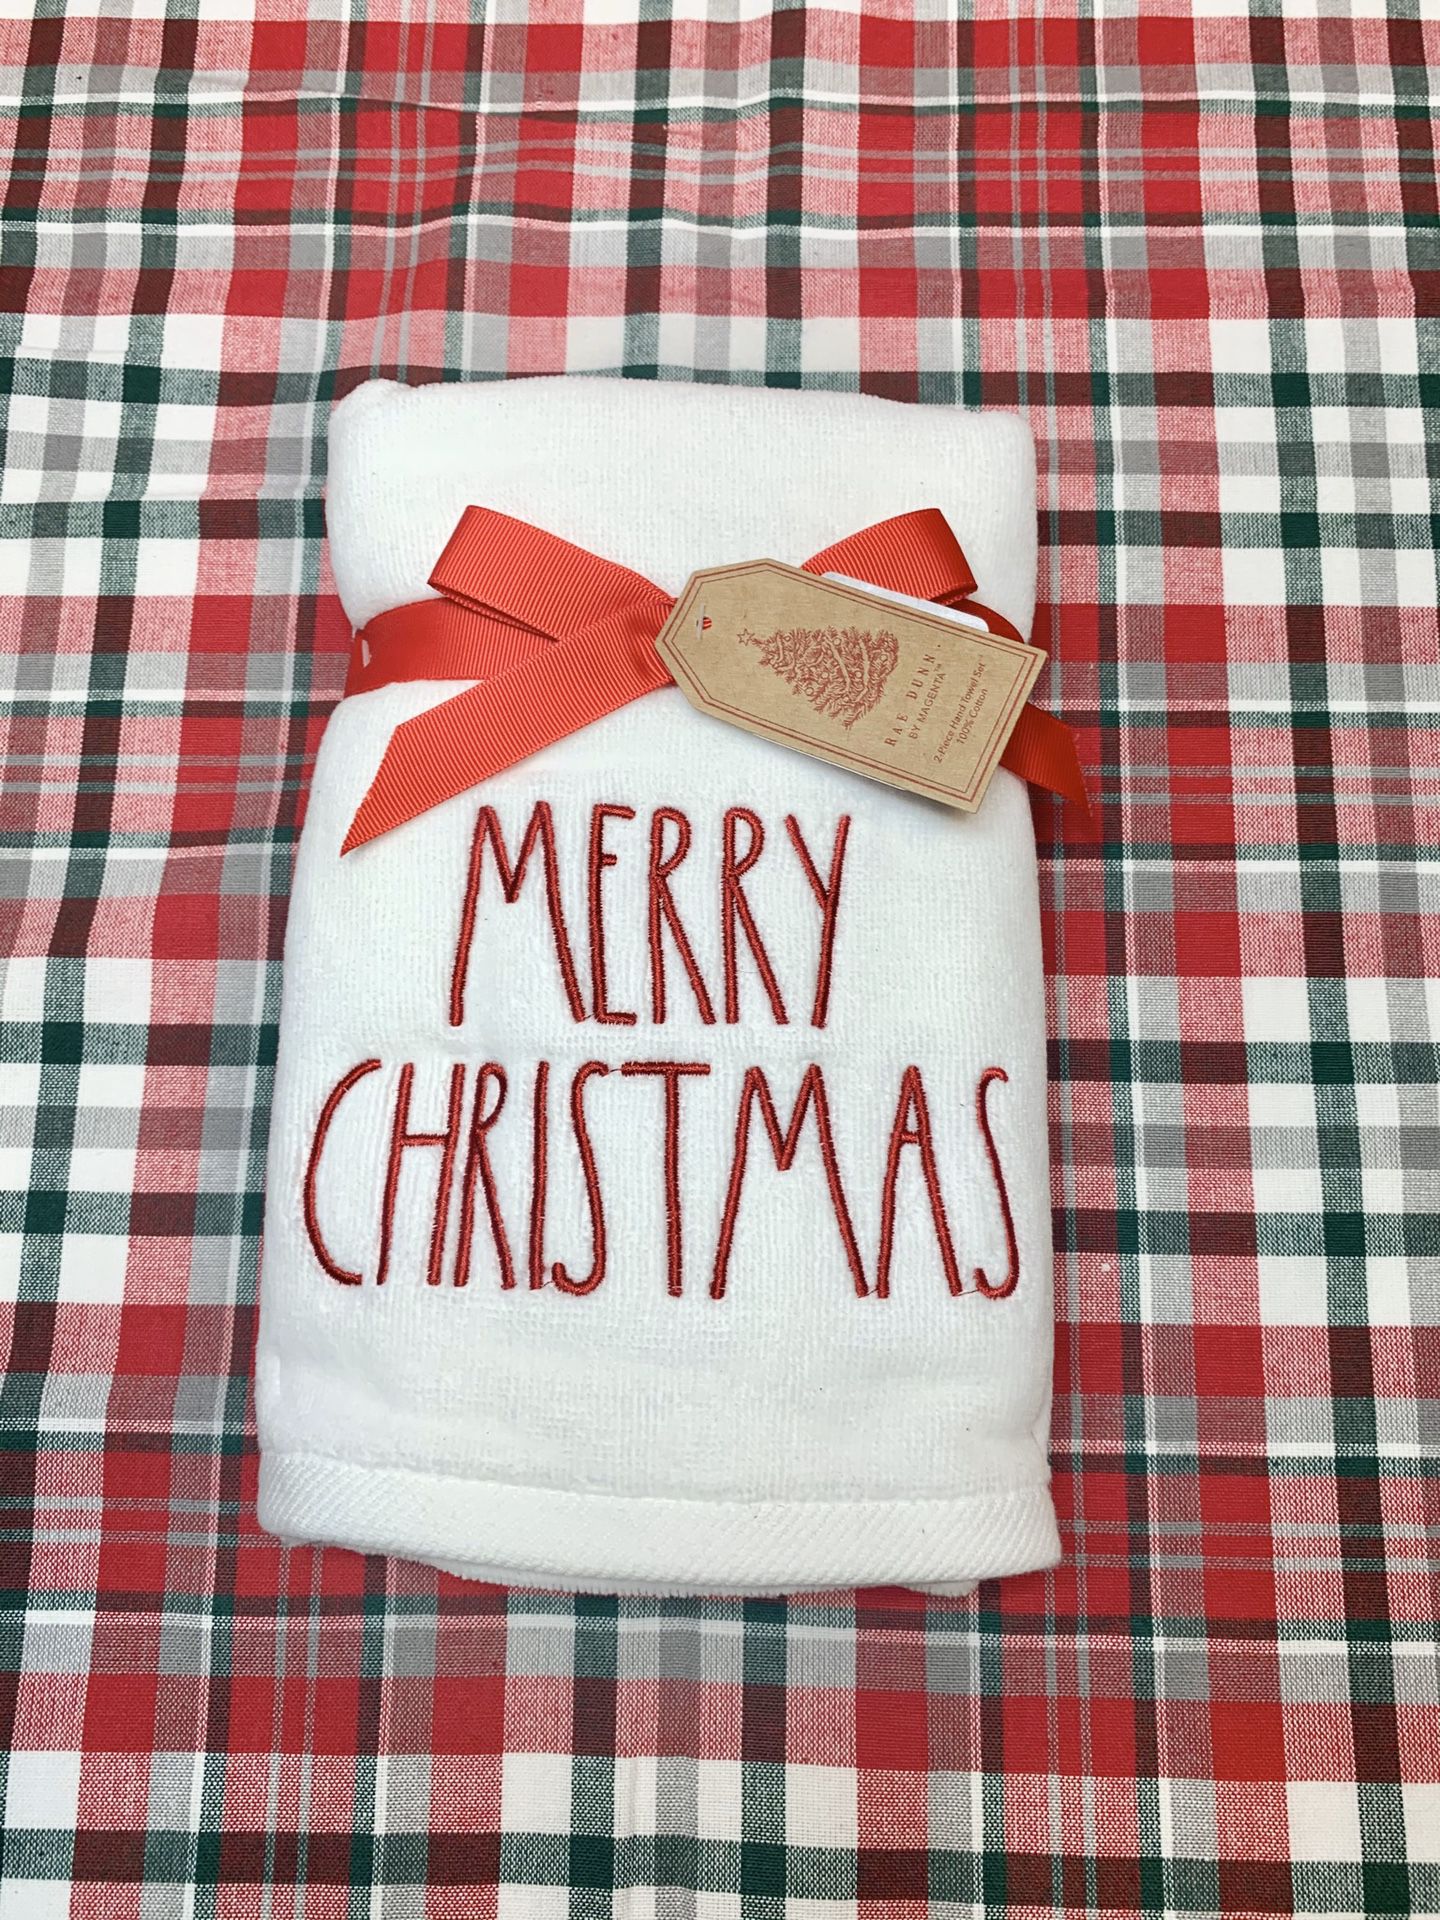 New Rae Dunn “MERRY CHRISTMAS” Kitchen Towels